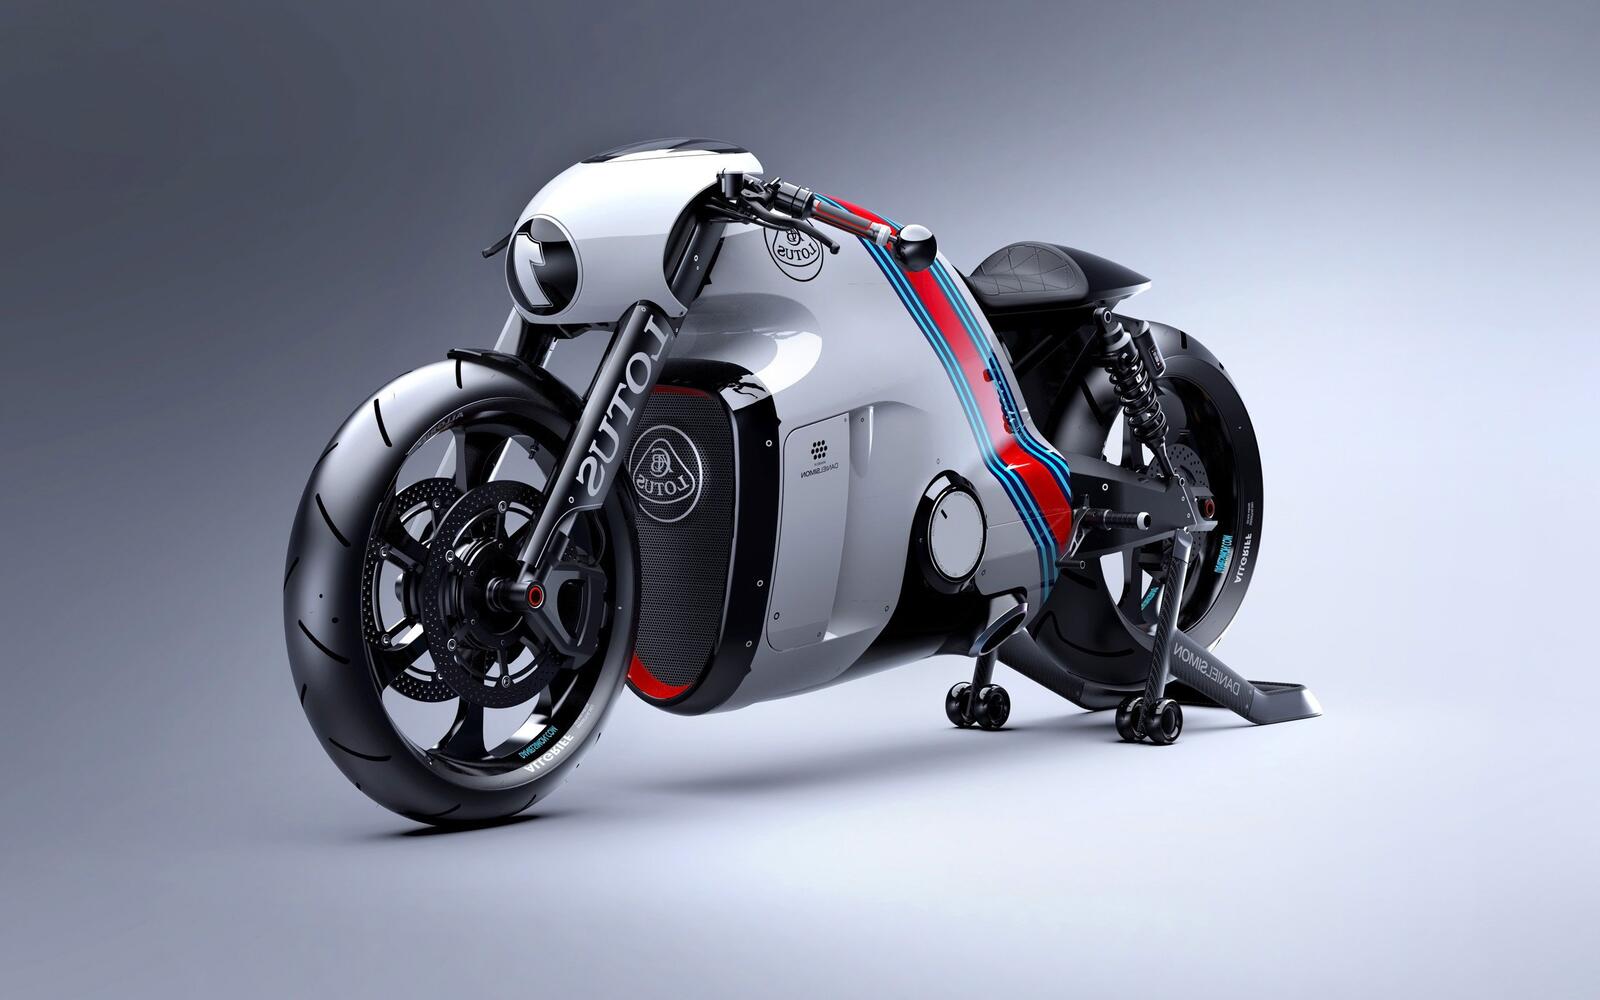 Wallpapers motorcycles concept bikes electric on the desktop